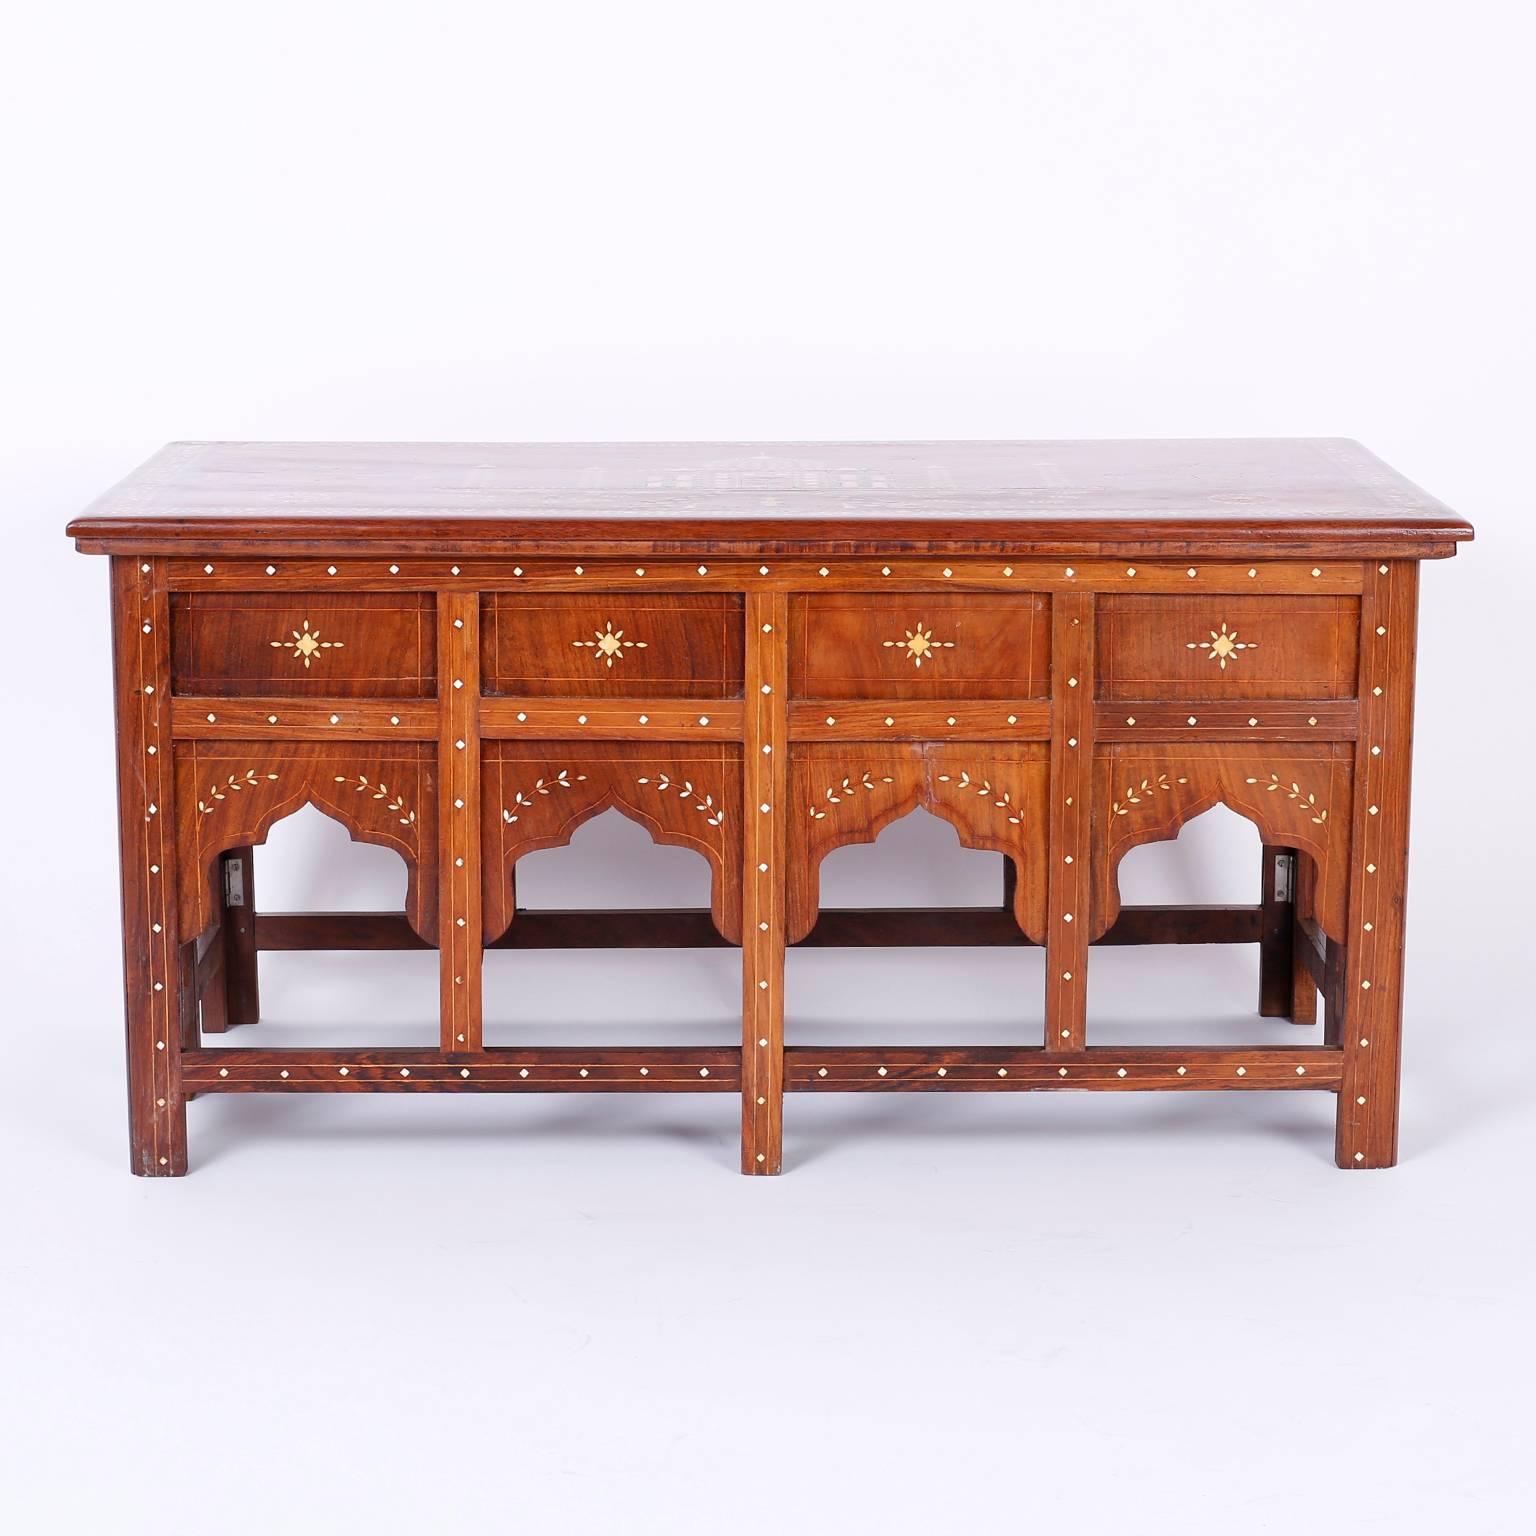 Antique Anglo Indian Mahogany low table or coffee or cocktail table featuring expertly crafted bone inlays of the Taj Mahal, phoenix birds, floral and geometric boarders, flowers and a fountain complete with jumping fish. The folding table base uses